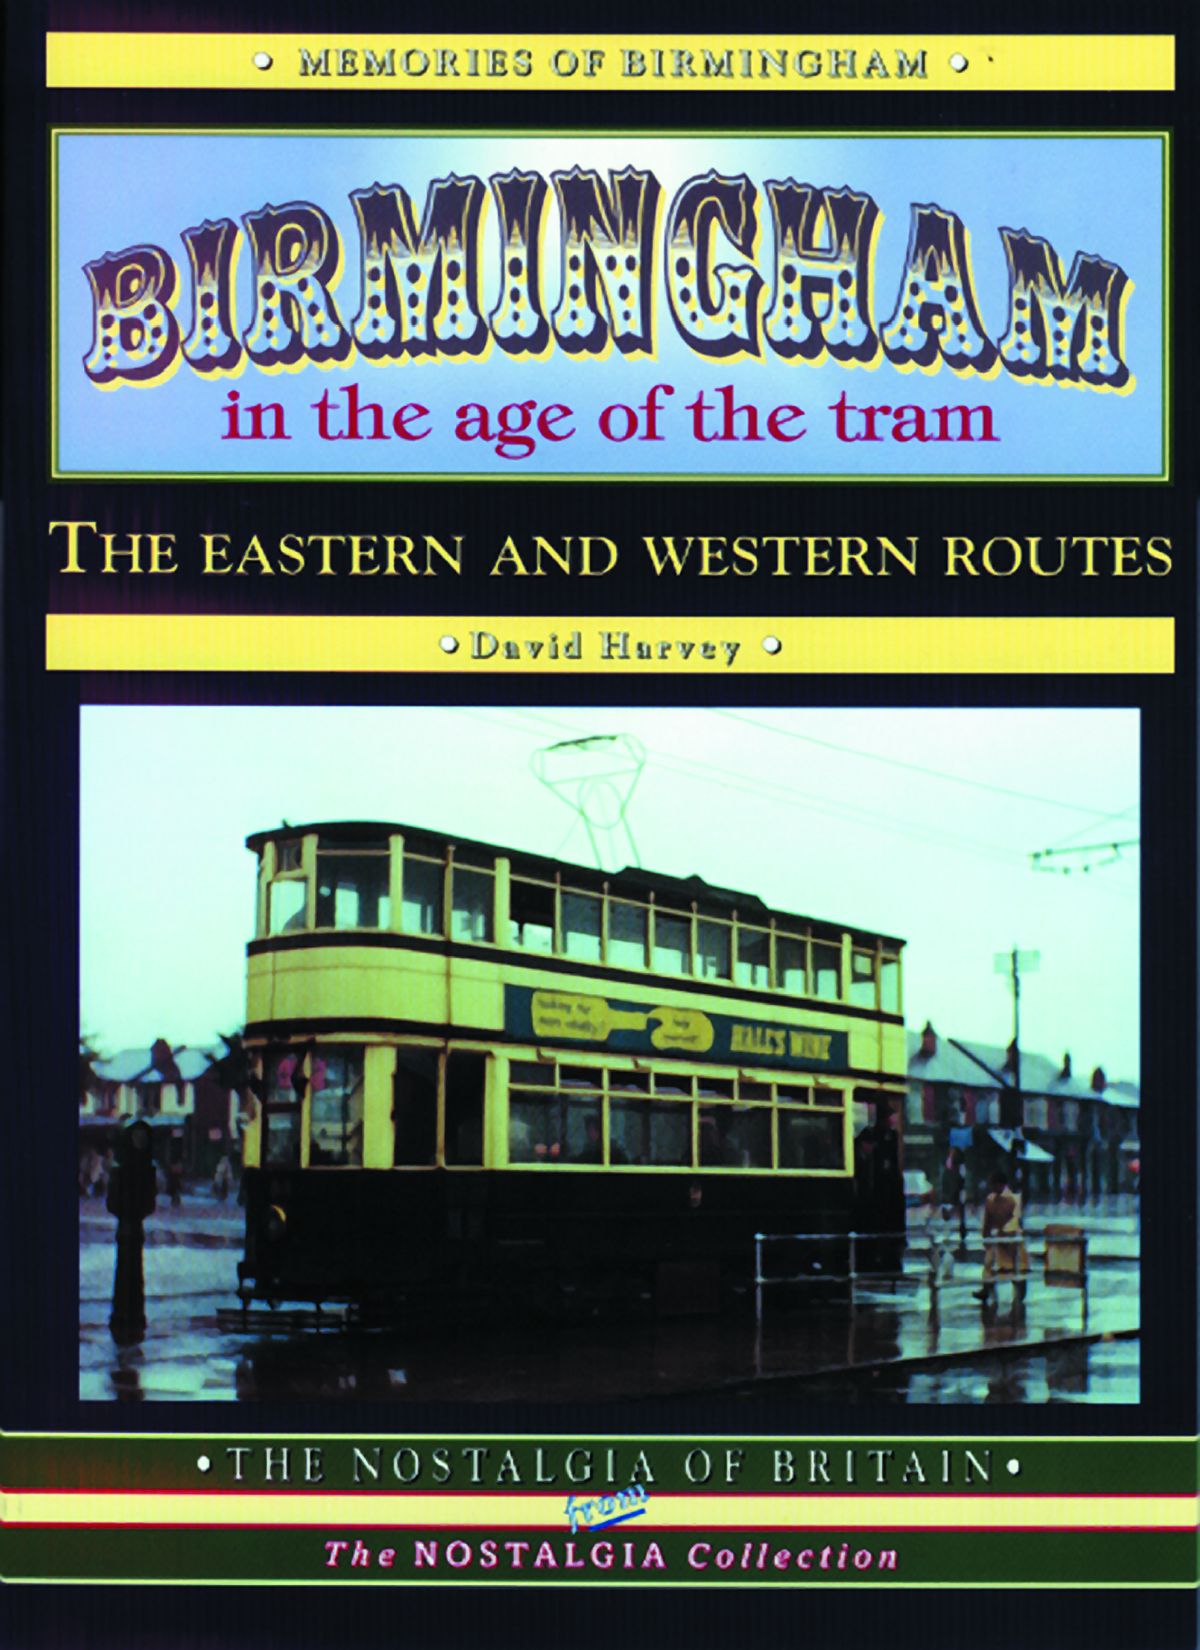 1838 - Birmingham In the Age of the Tram: The Eastern & Western Routes